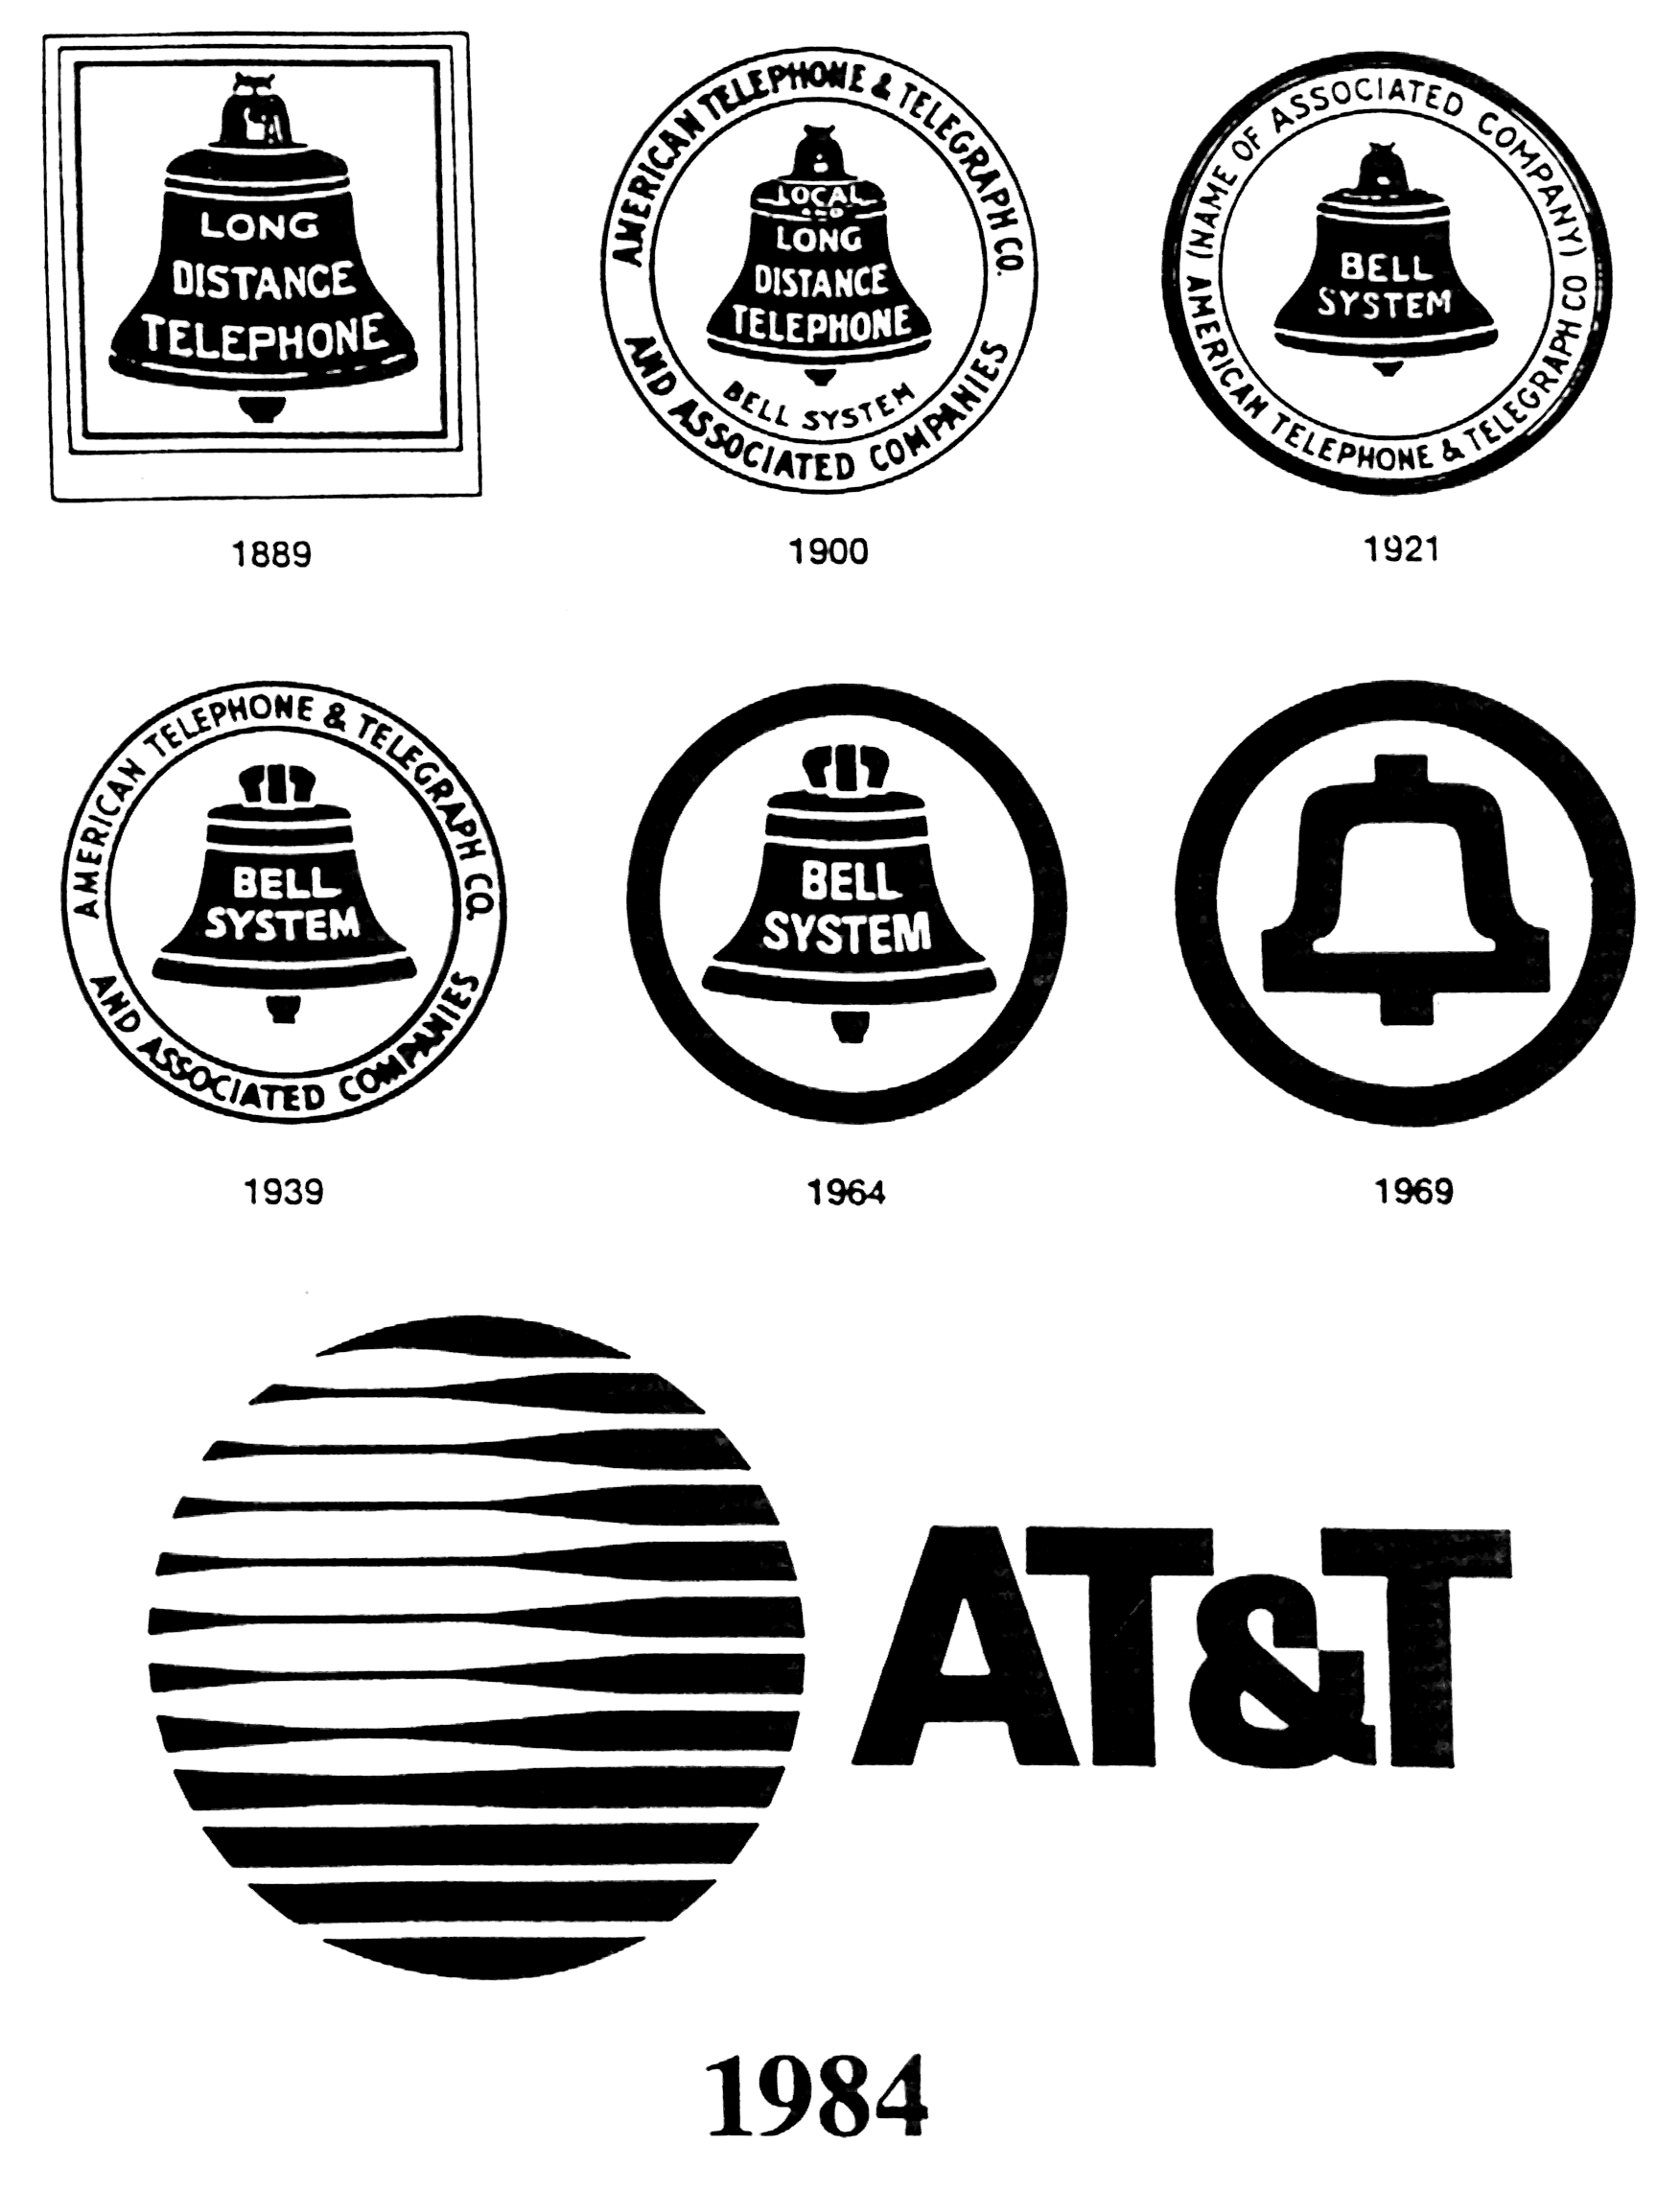 Old Phone Company Logo - American Telephone and Telegraph and Bell System logos thru the ...